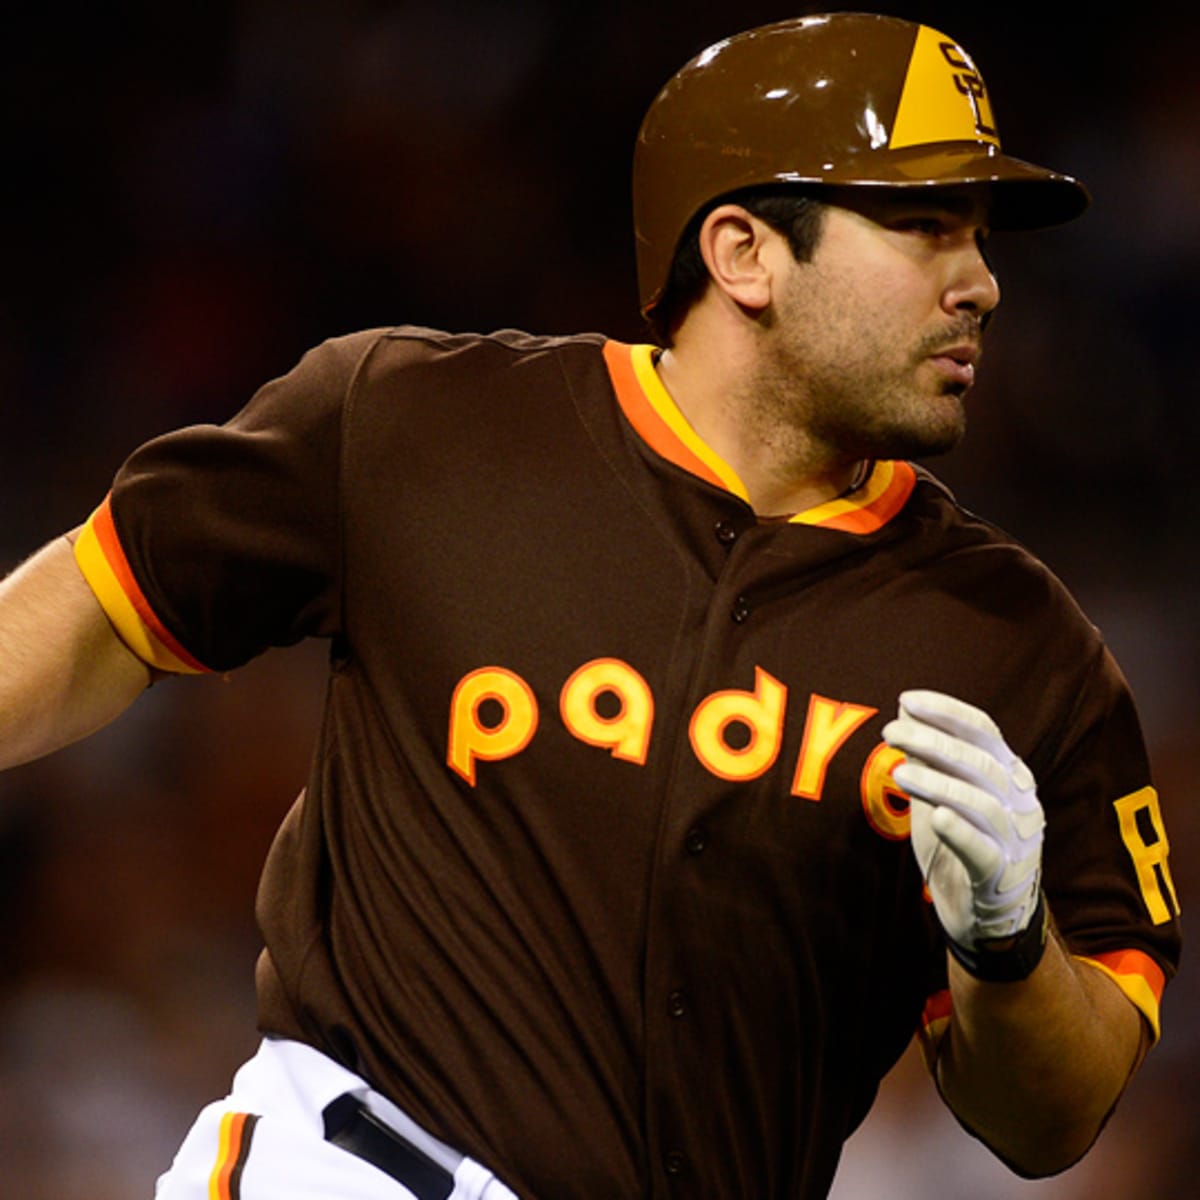 padres ugly uniforms